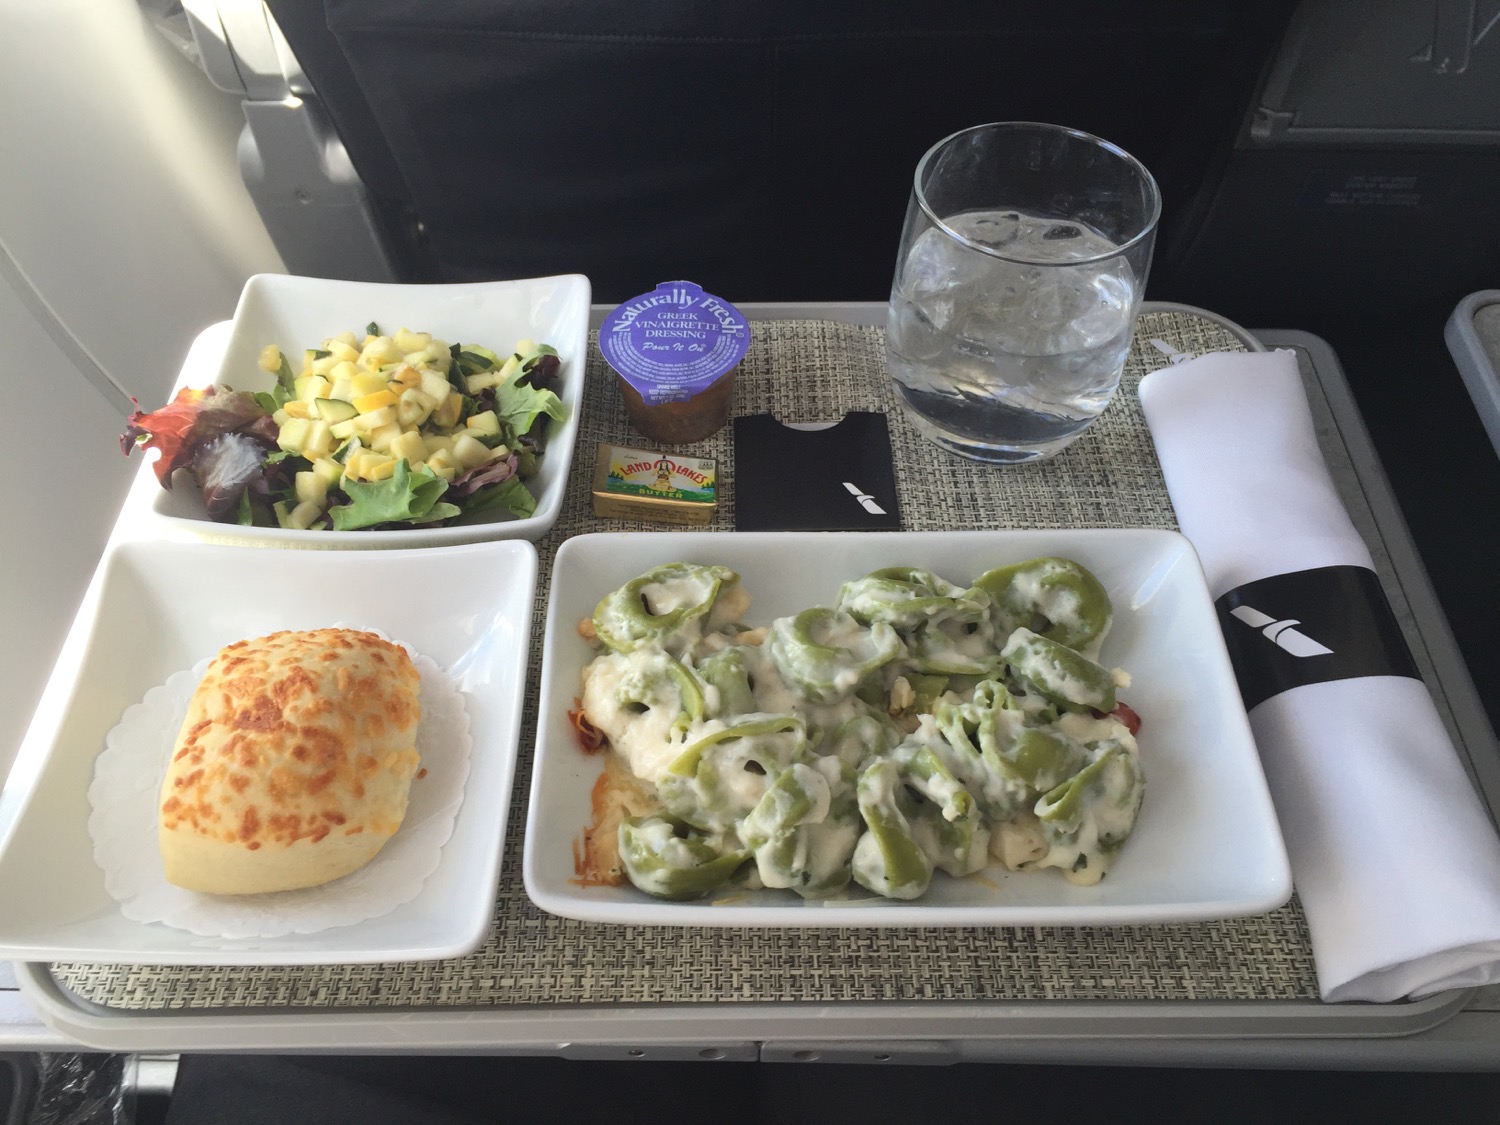 American Airlines Cuts Meals In First Class Does It Matter? Live